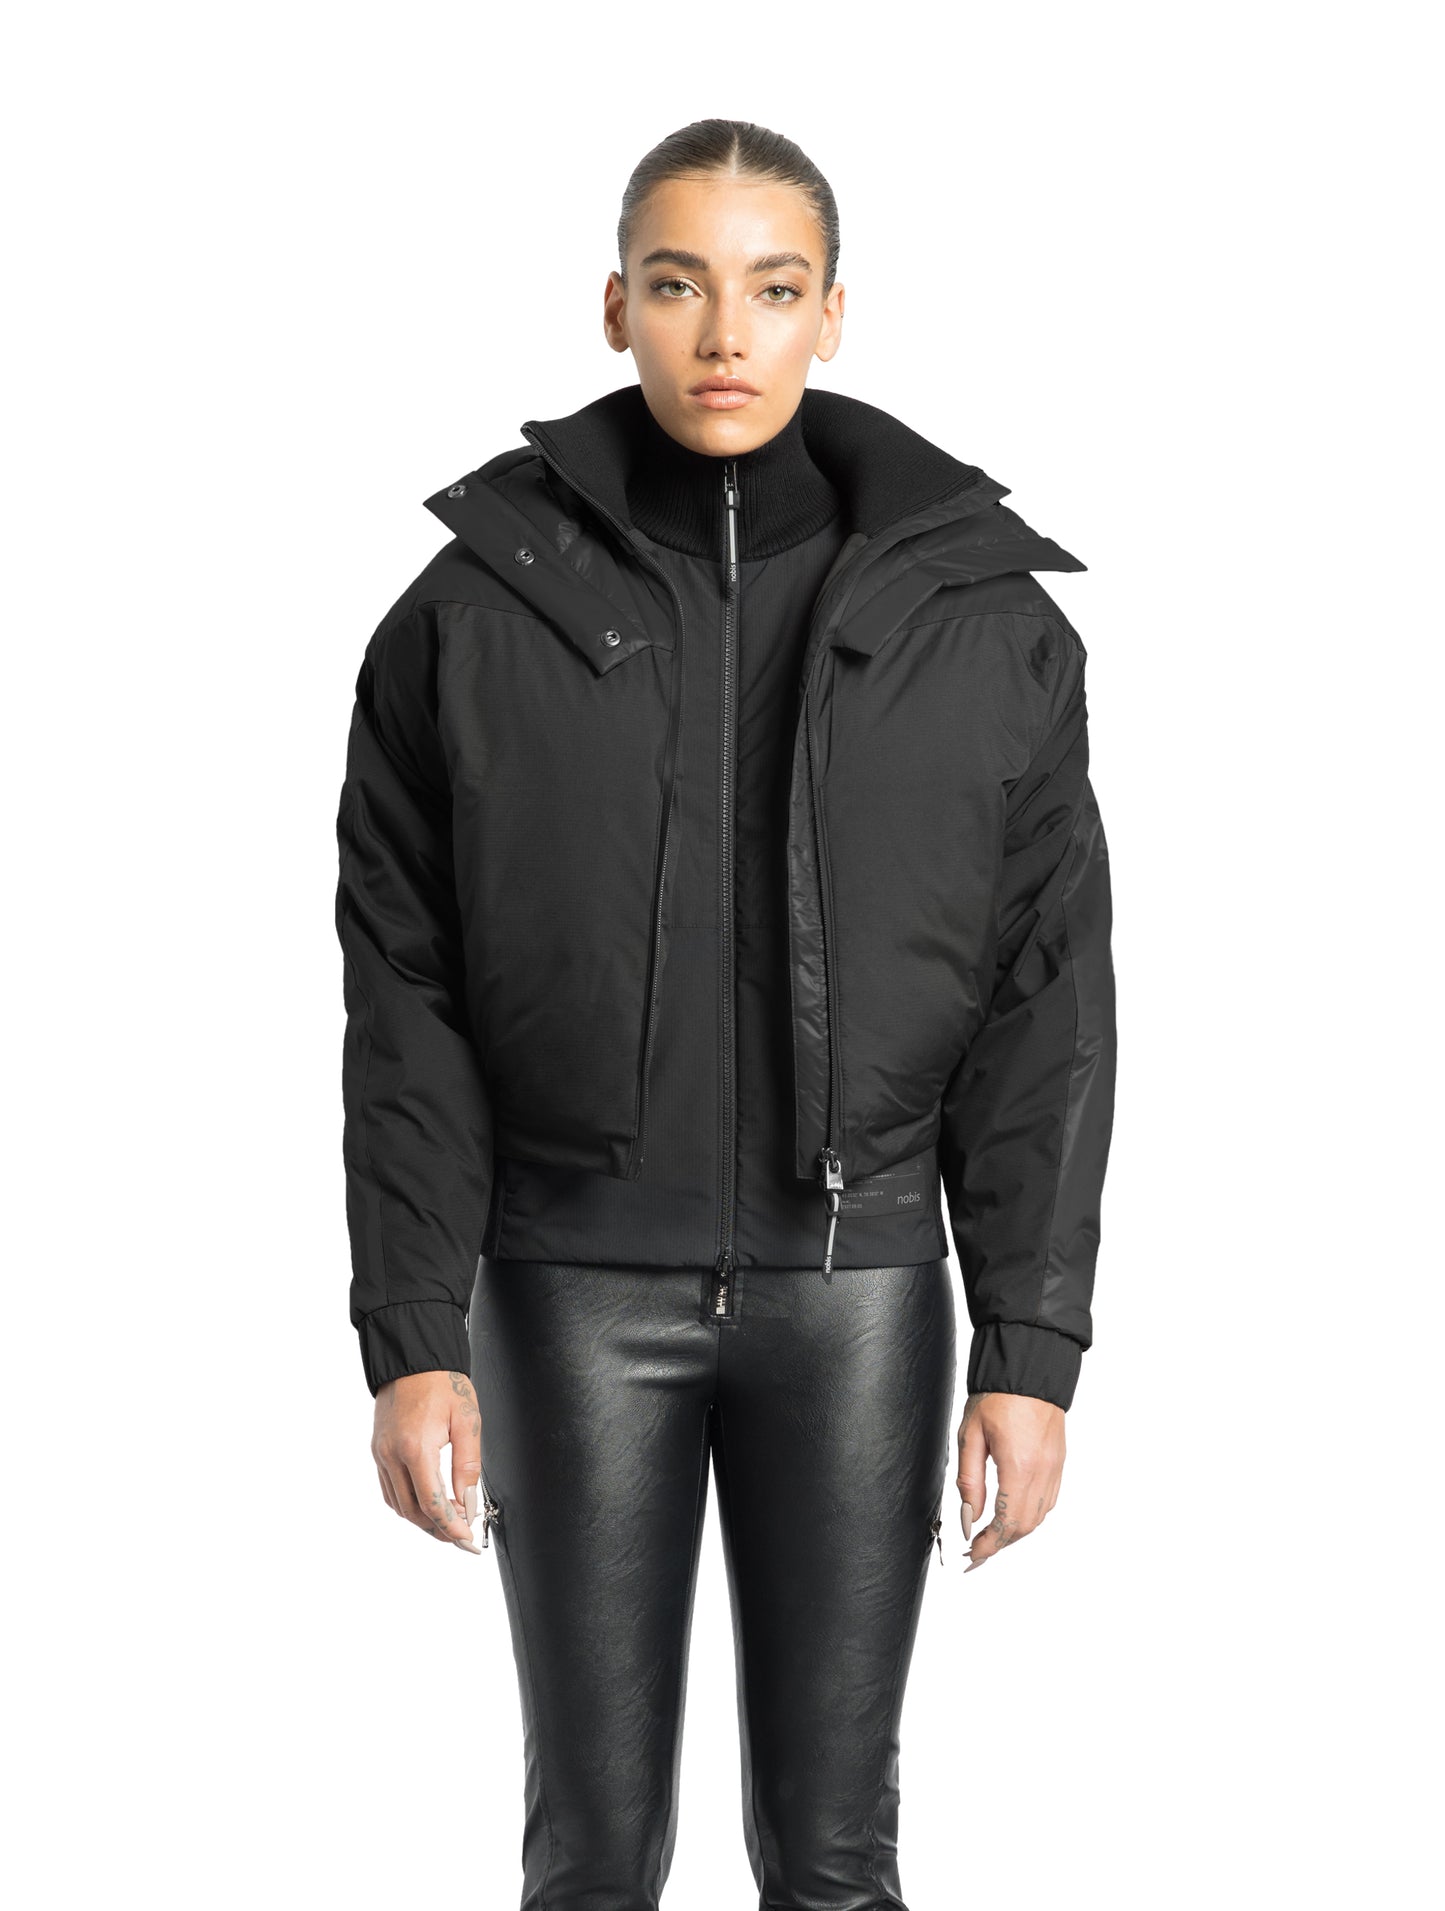 Aspen Women's Batwing Jacket in hip length, premium stretch ripstop and cire technical nylon taffeta fabrication, Premium Canadian White Duck Down insulation, non-removable down-filled hood, centre front two-way zipper, winged arm detailing, in Black